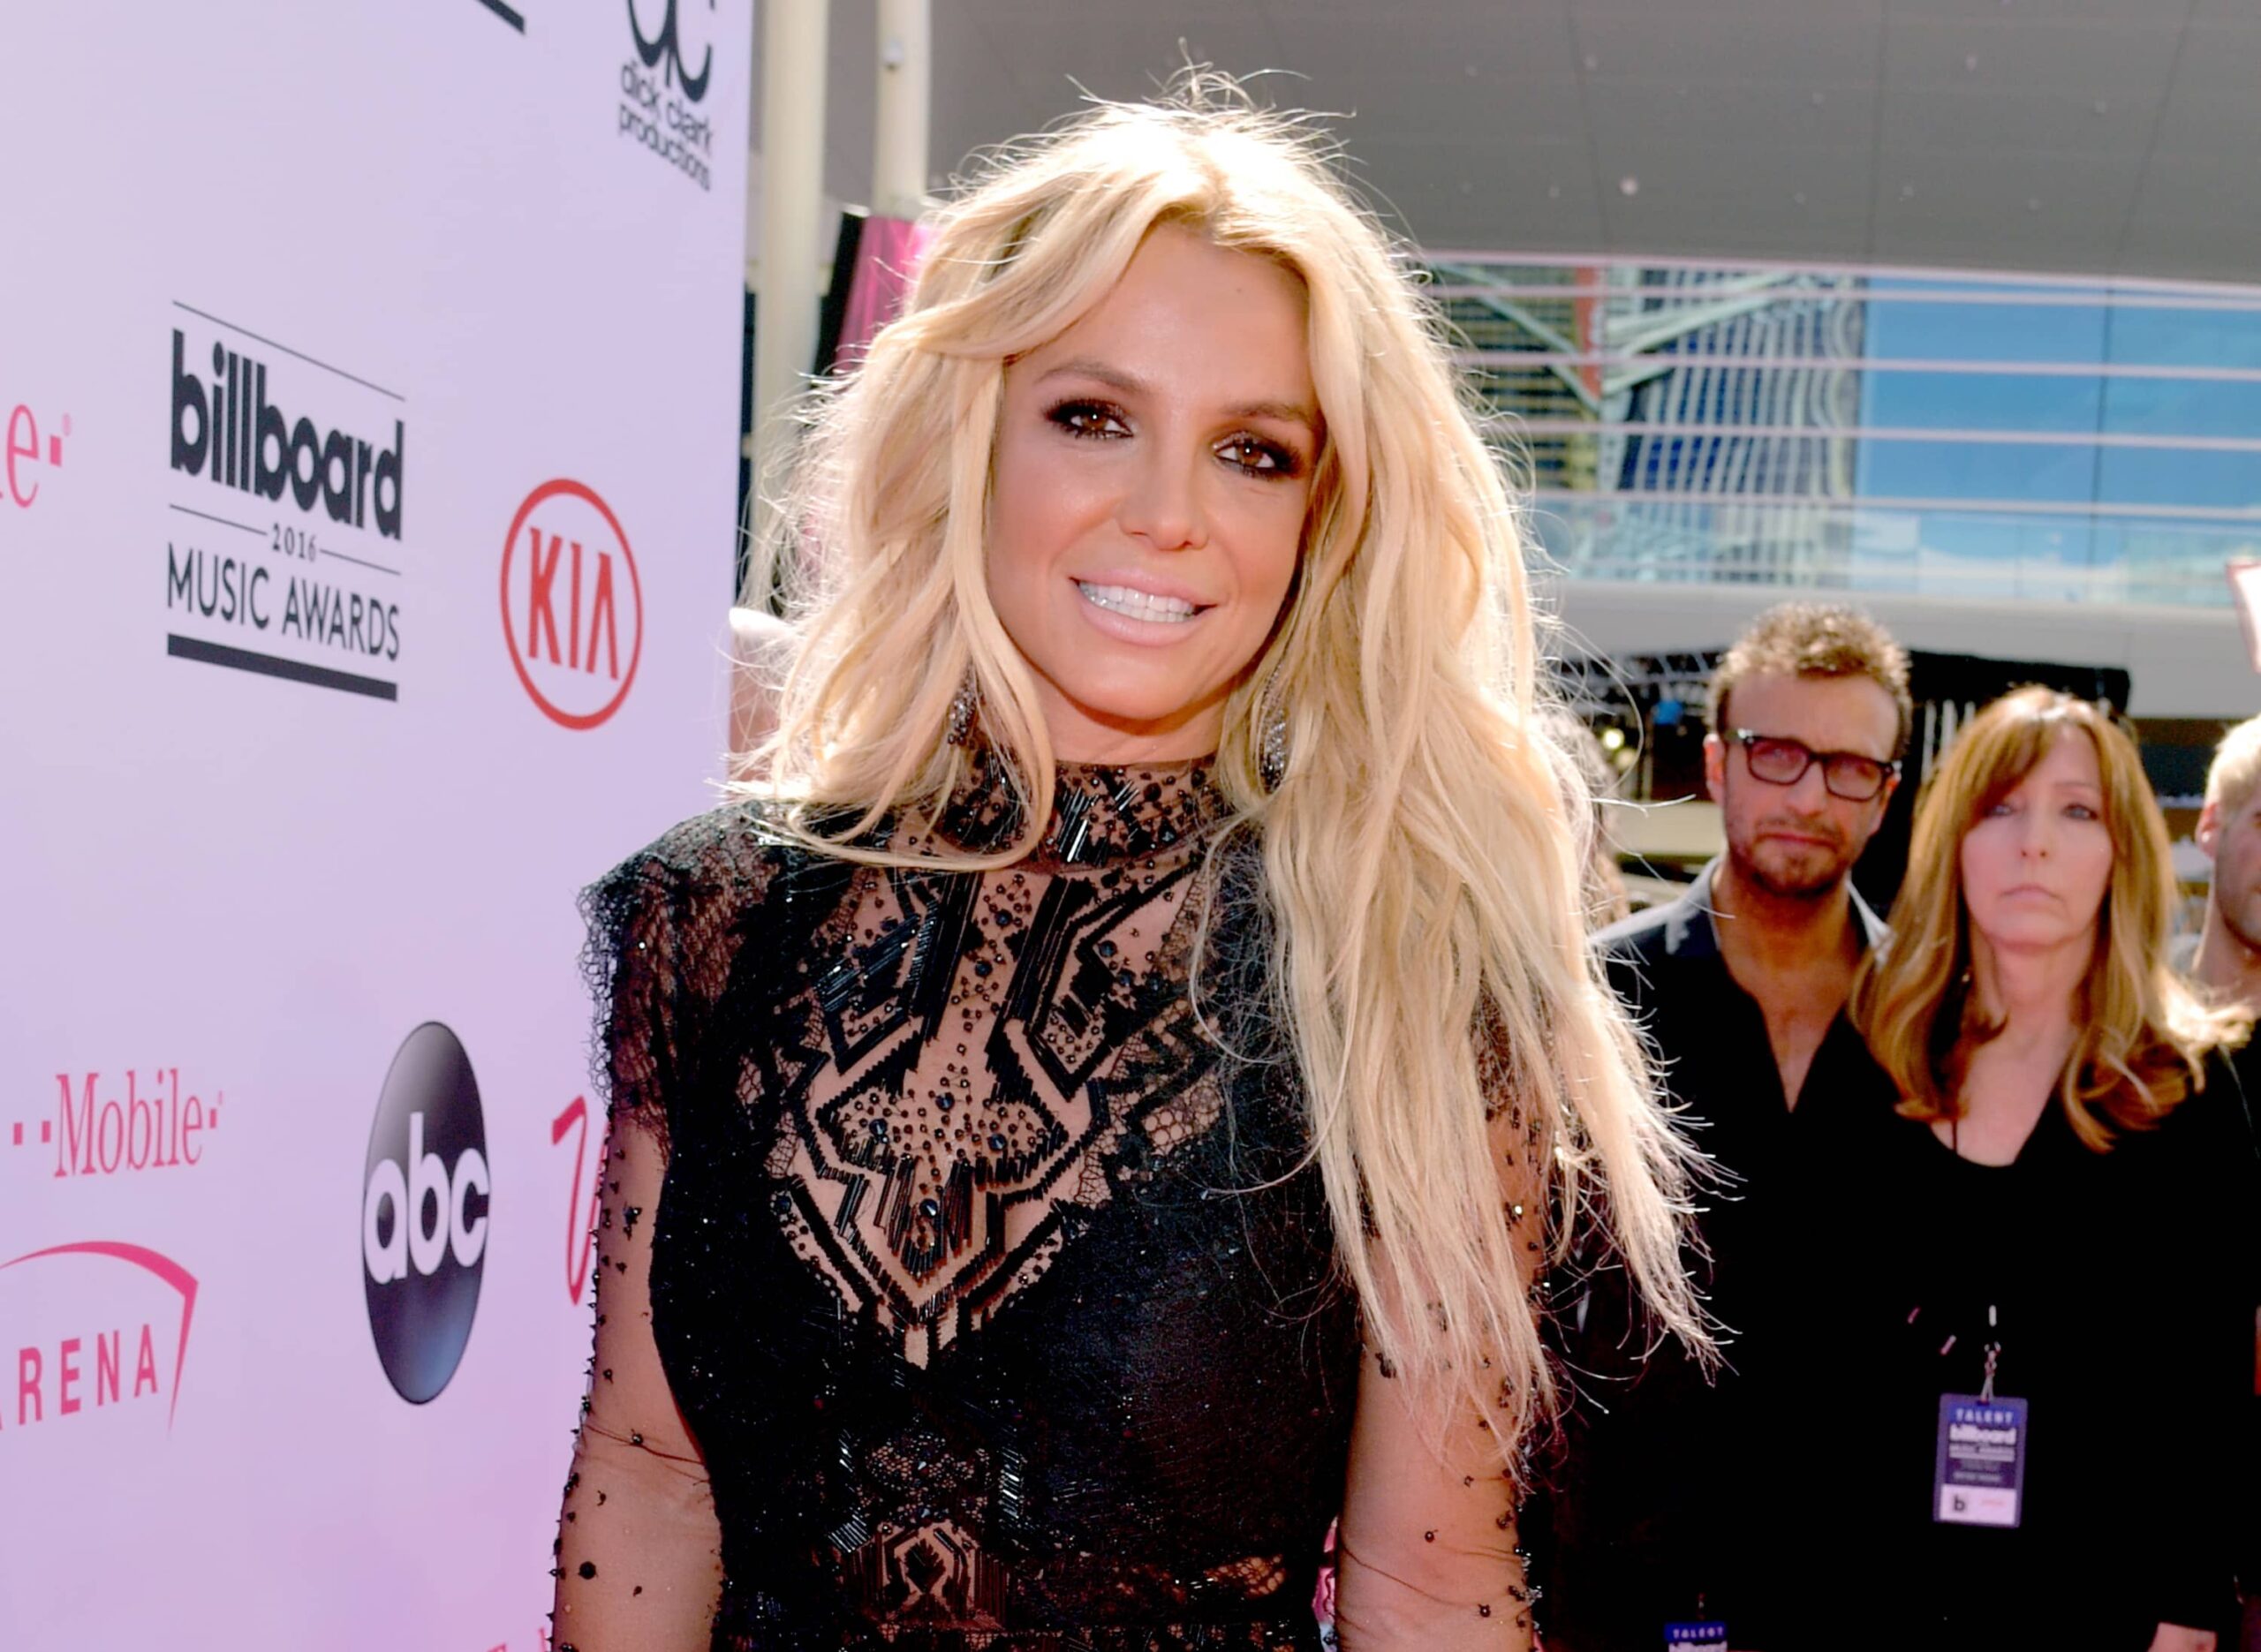 Britney Spears’ conservatorship case prompts bipartisan ‘Free Britney’ invoice